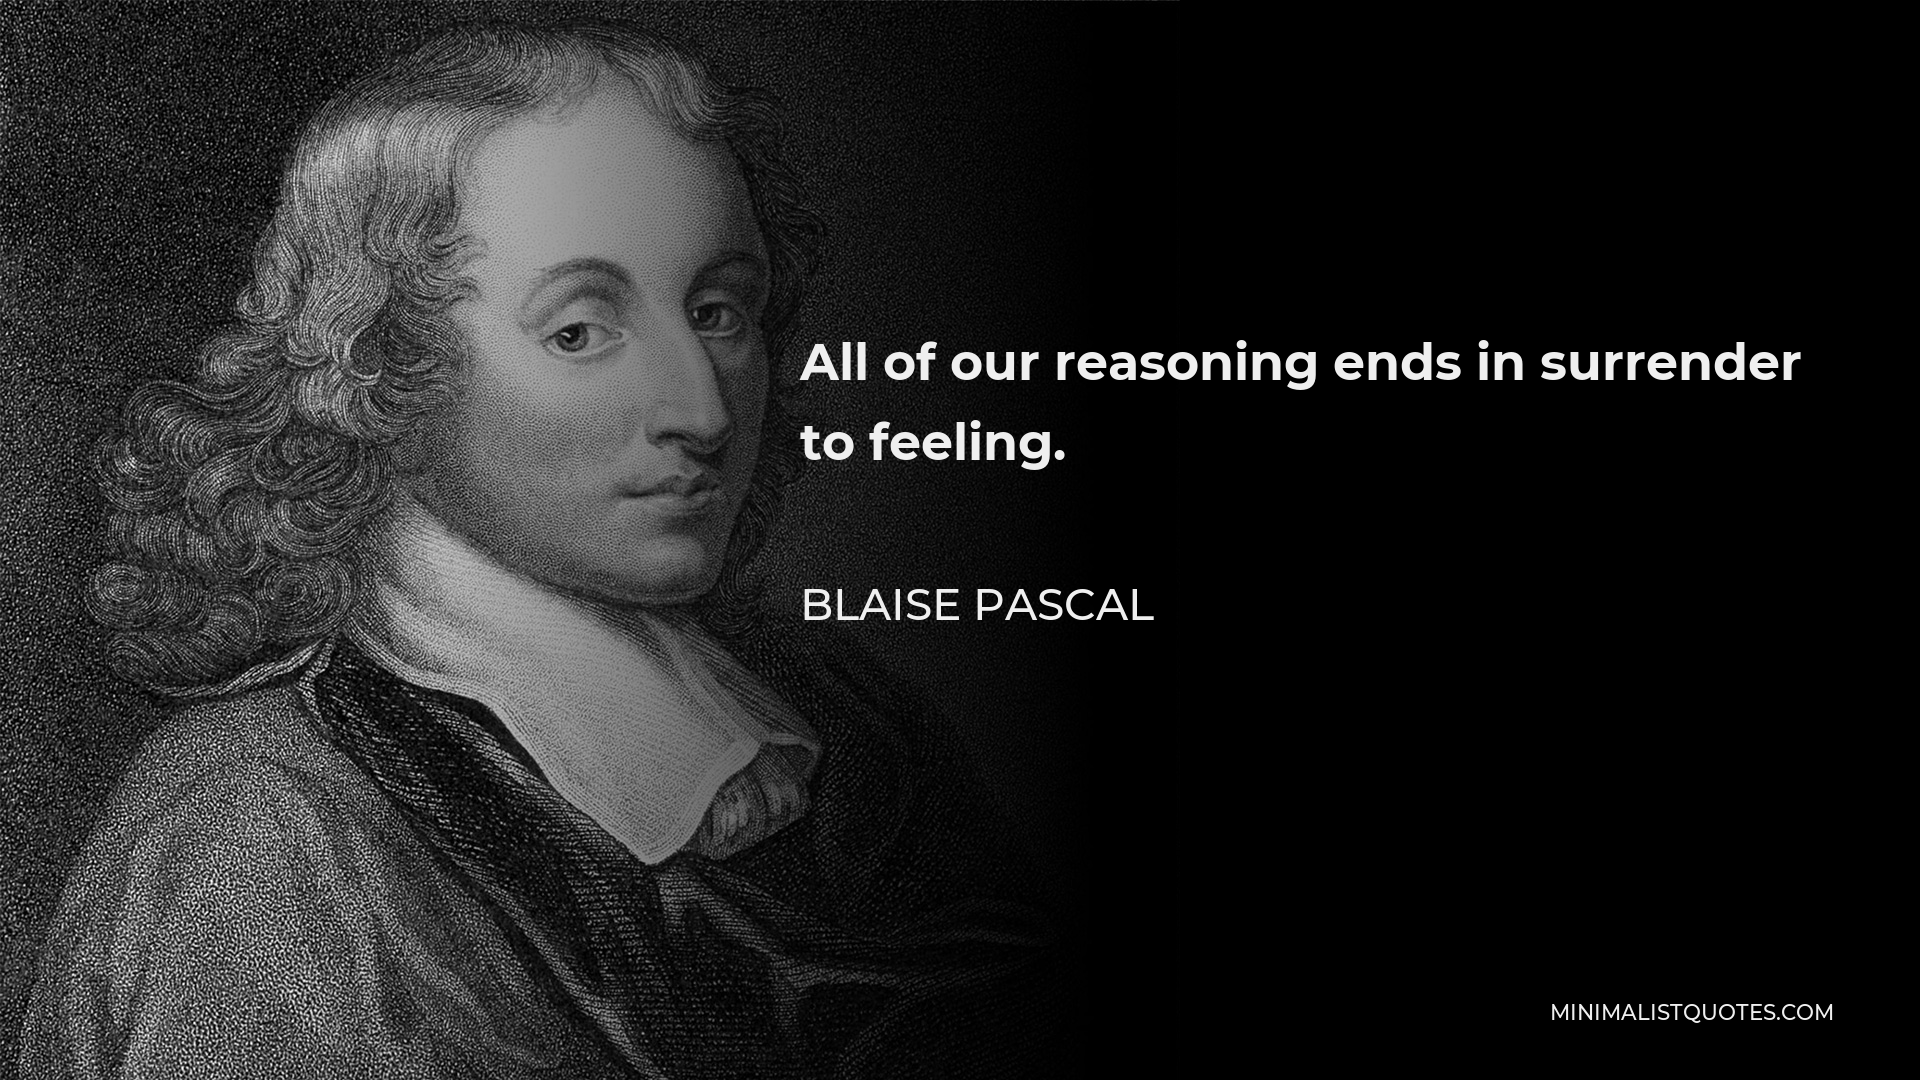 Blaise Pascal Quote - All of our reasoning ends in surrender to feeling.